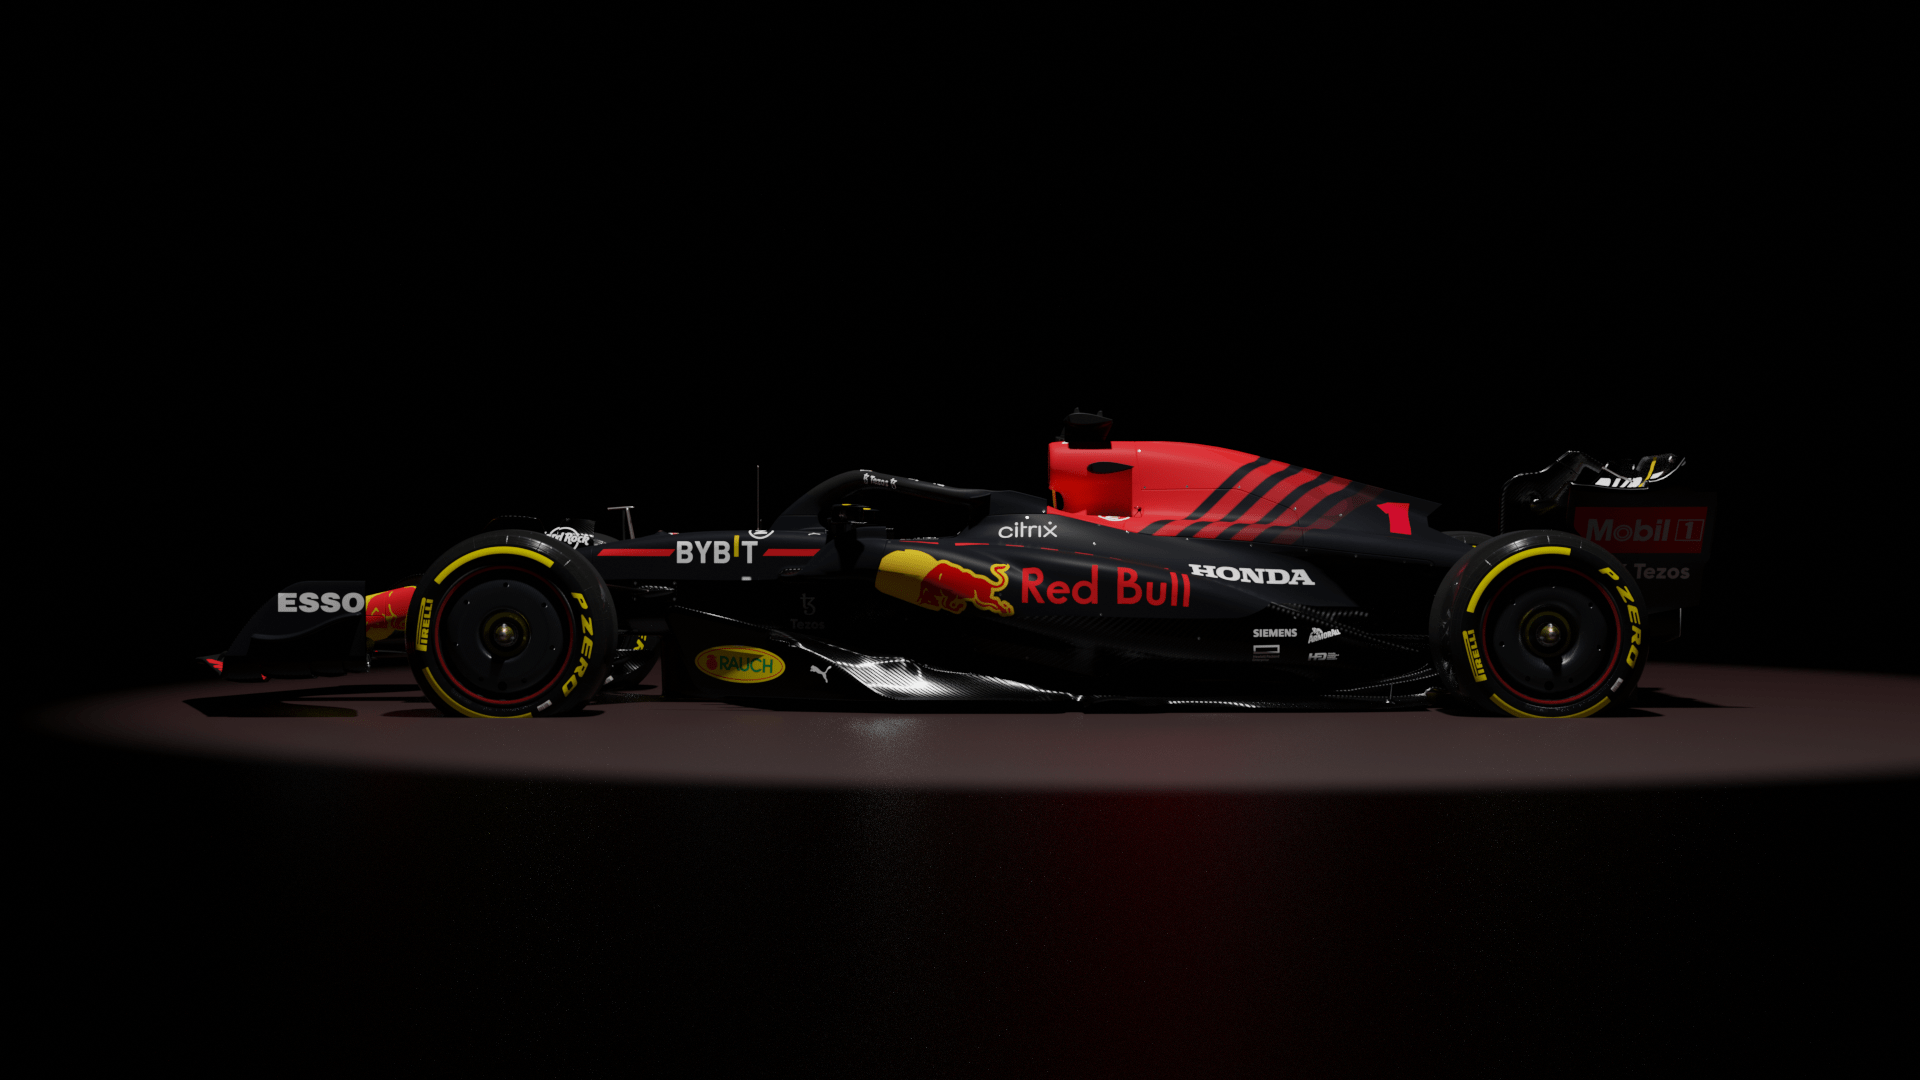 2023 RED BULL RACING CONCEPT LIVERY